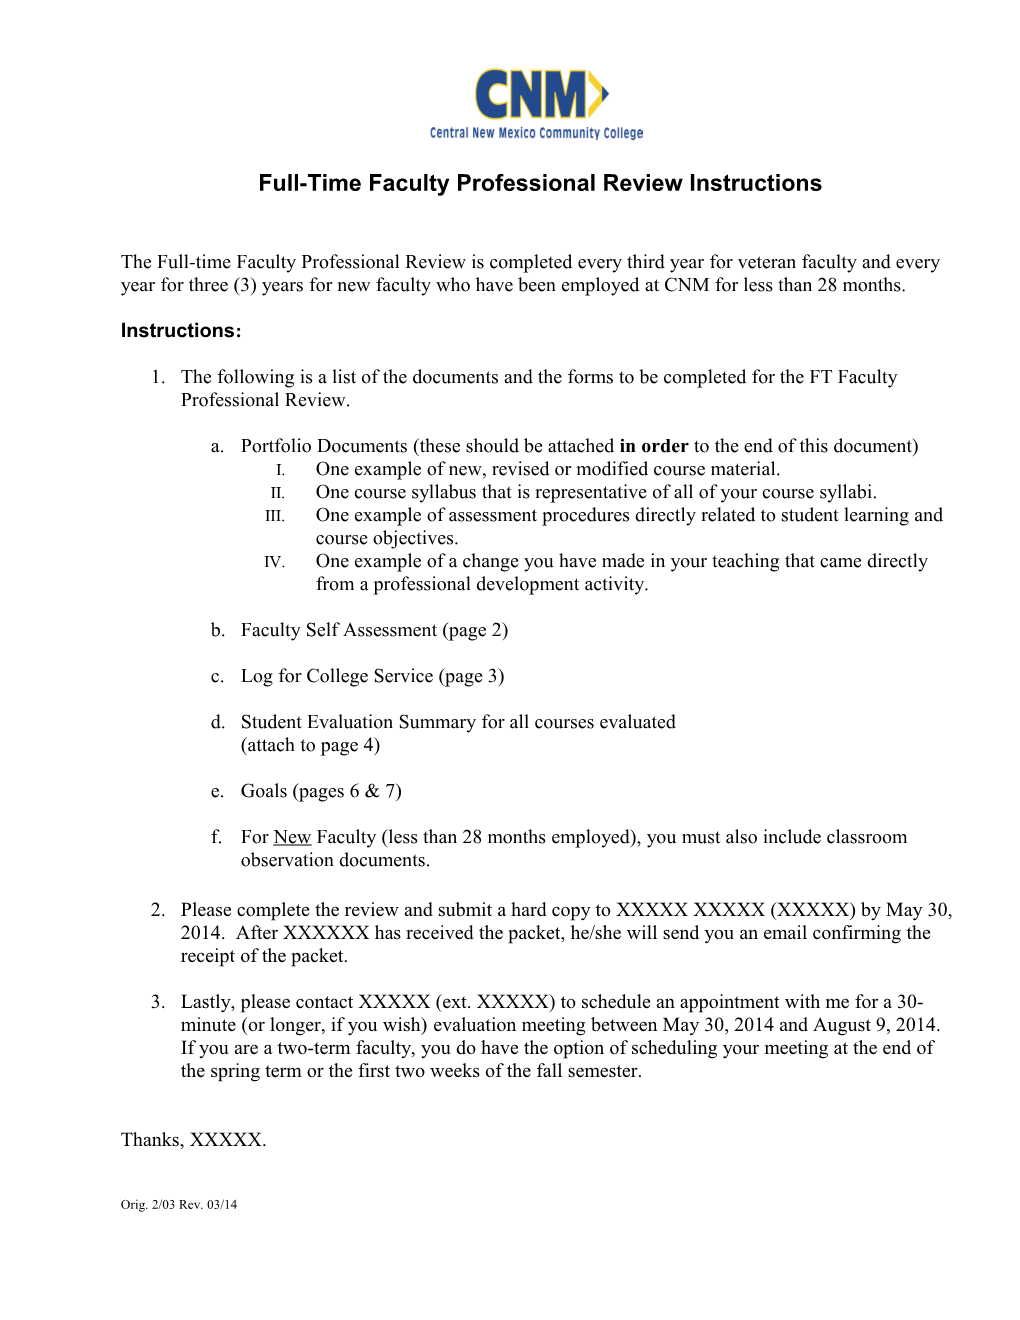 Full-Time Faculty Professional Review